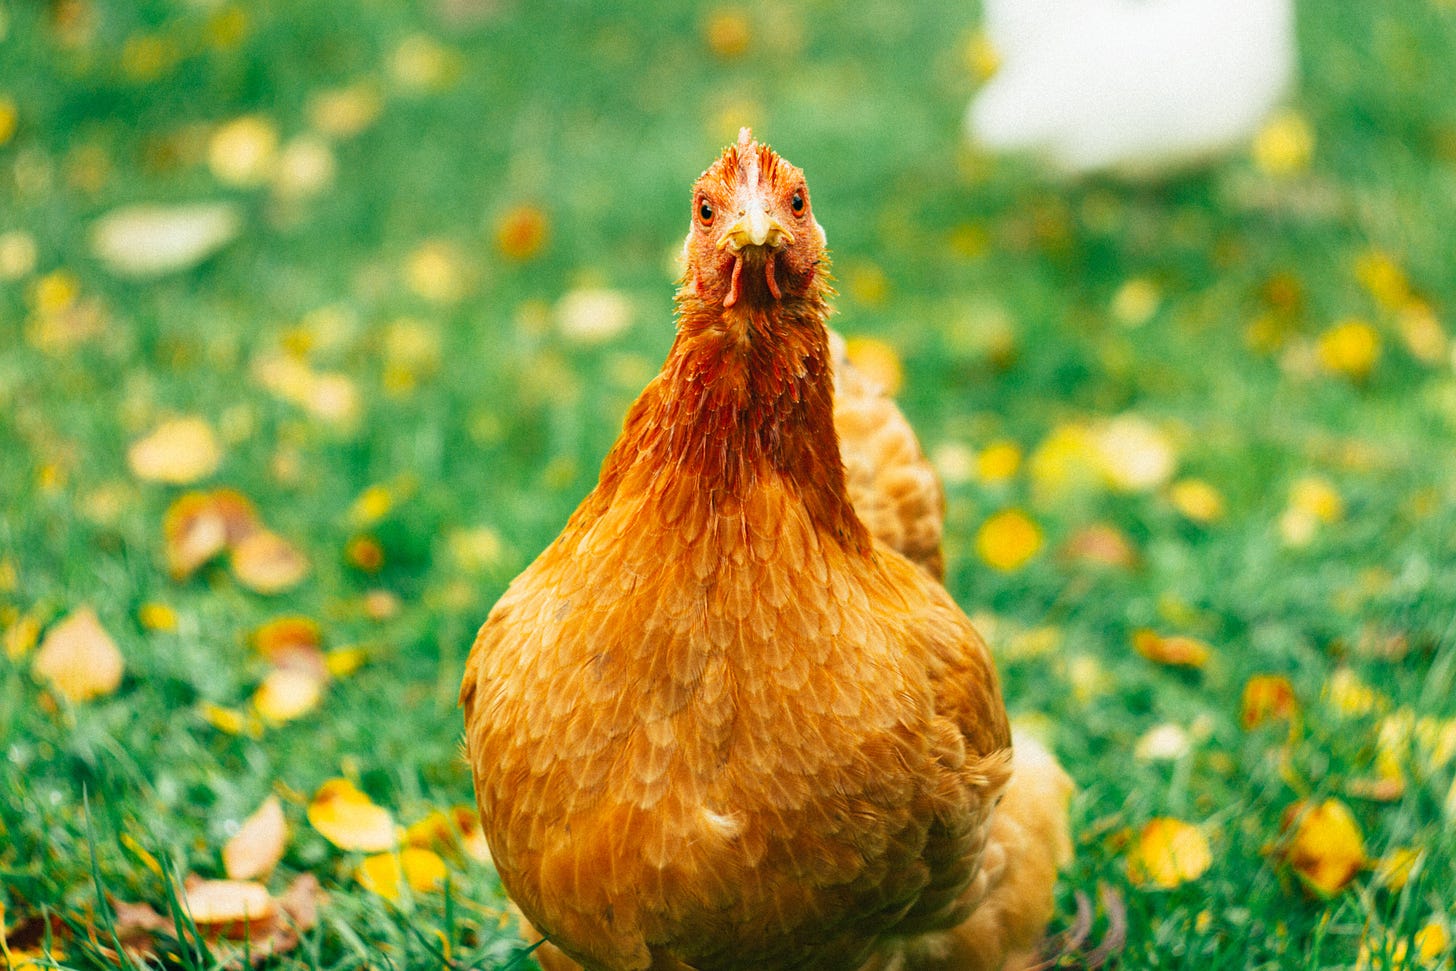 A golden brown hen looking directly at the camera with a mix of curiosity and disapproval.